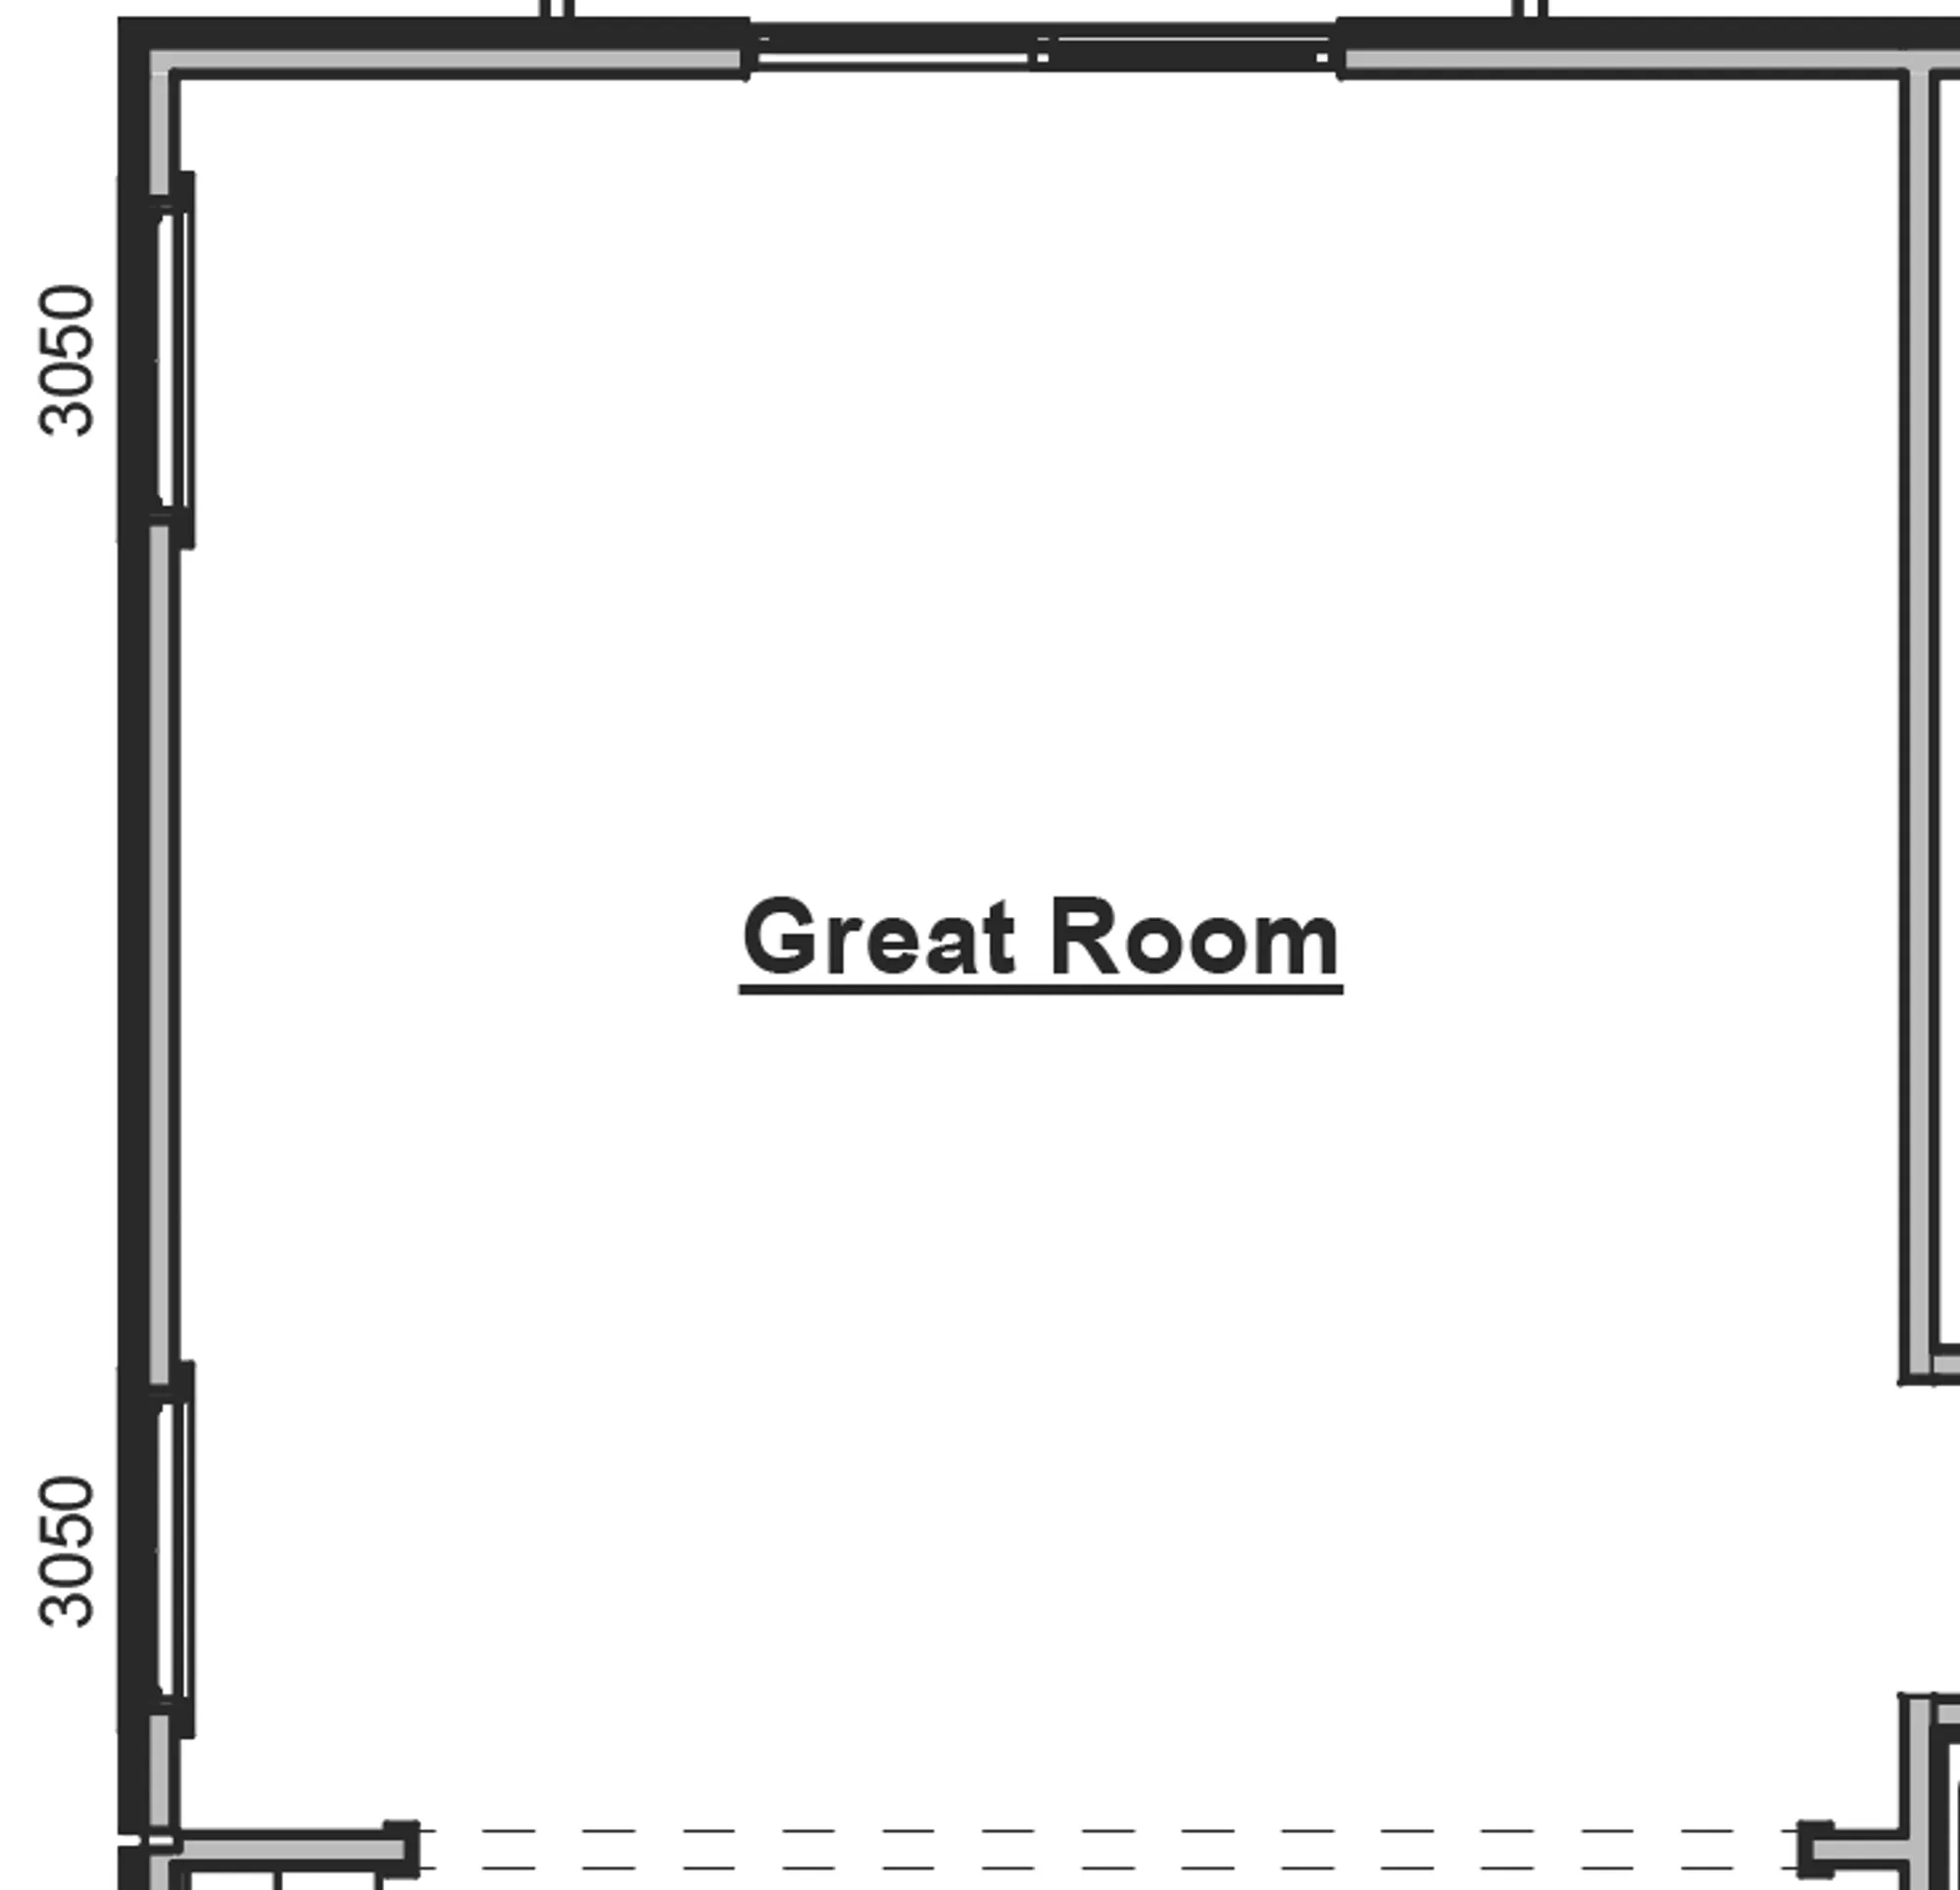 Great Room Window Option - undefined